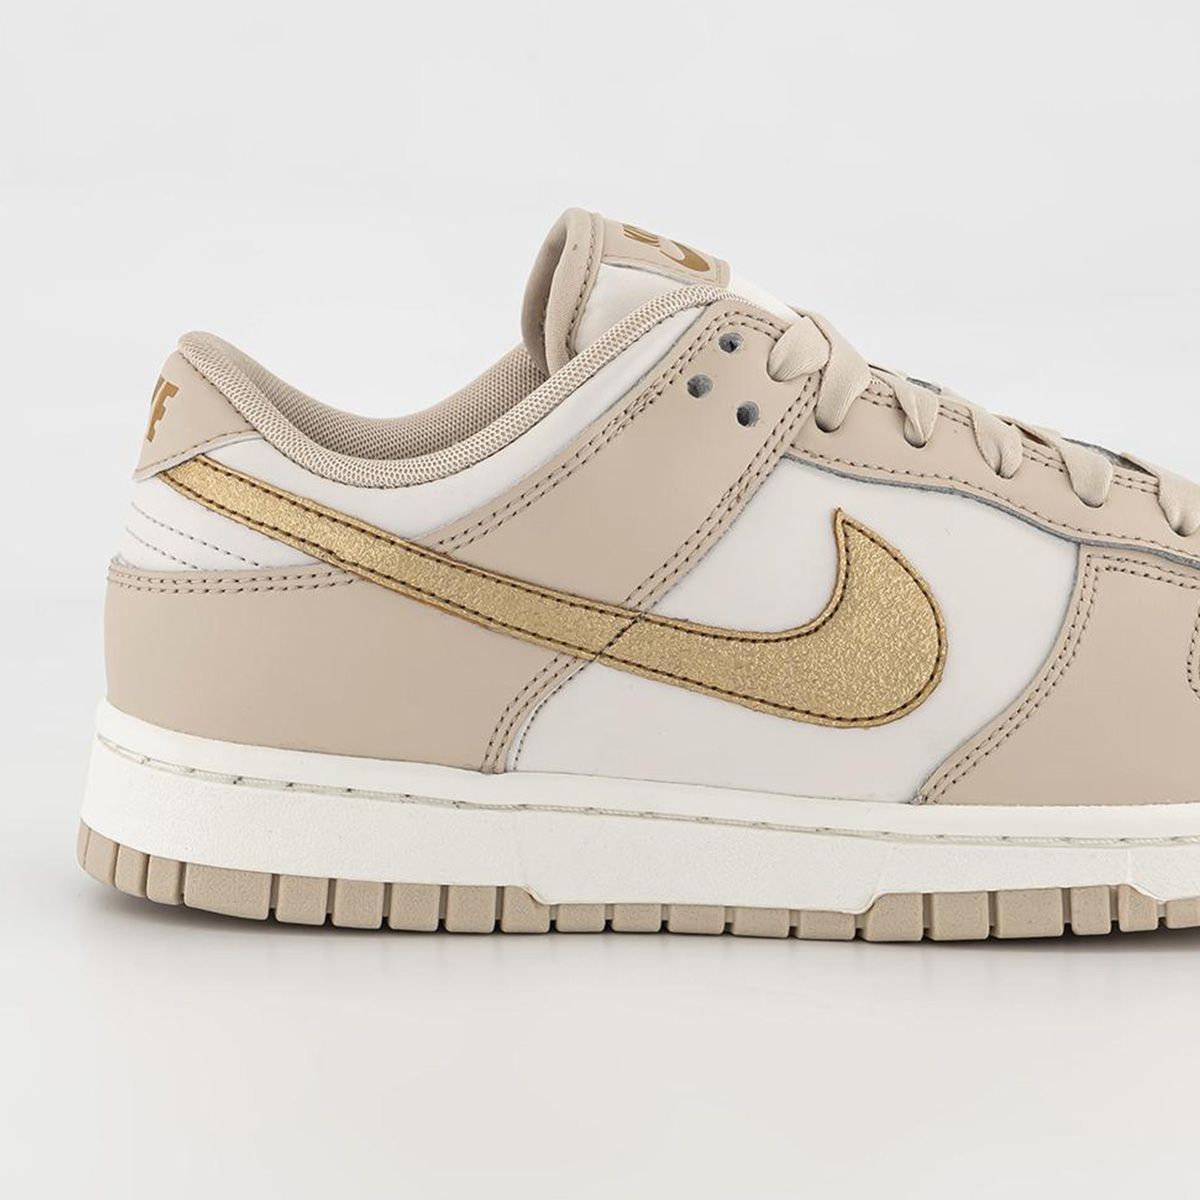 New Looks // Nike Dunk Low 